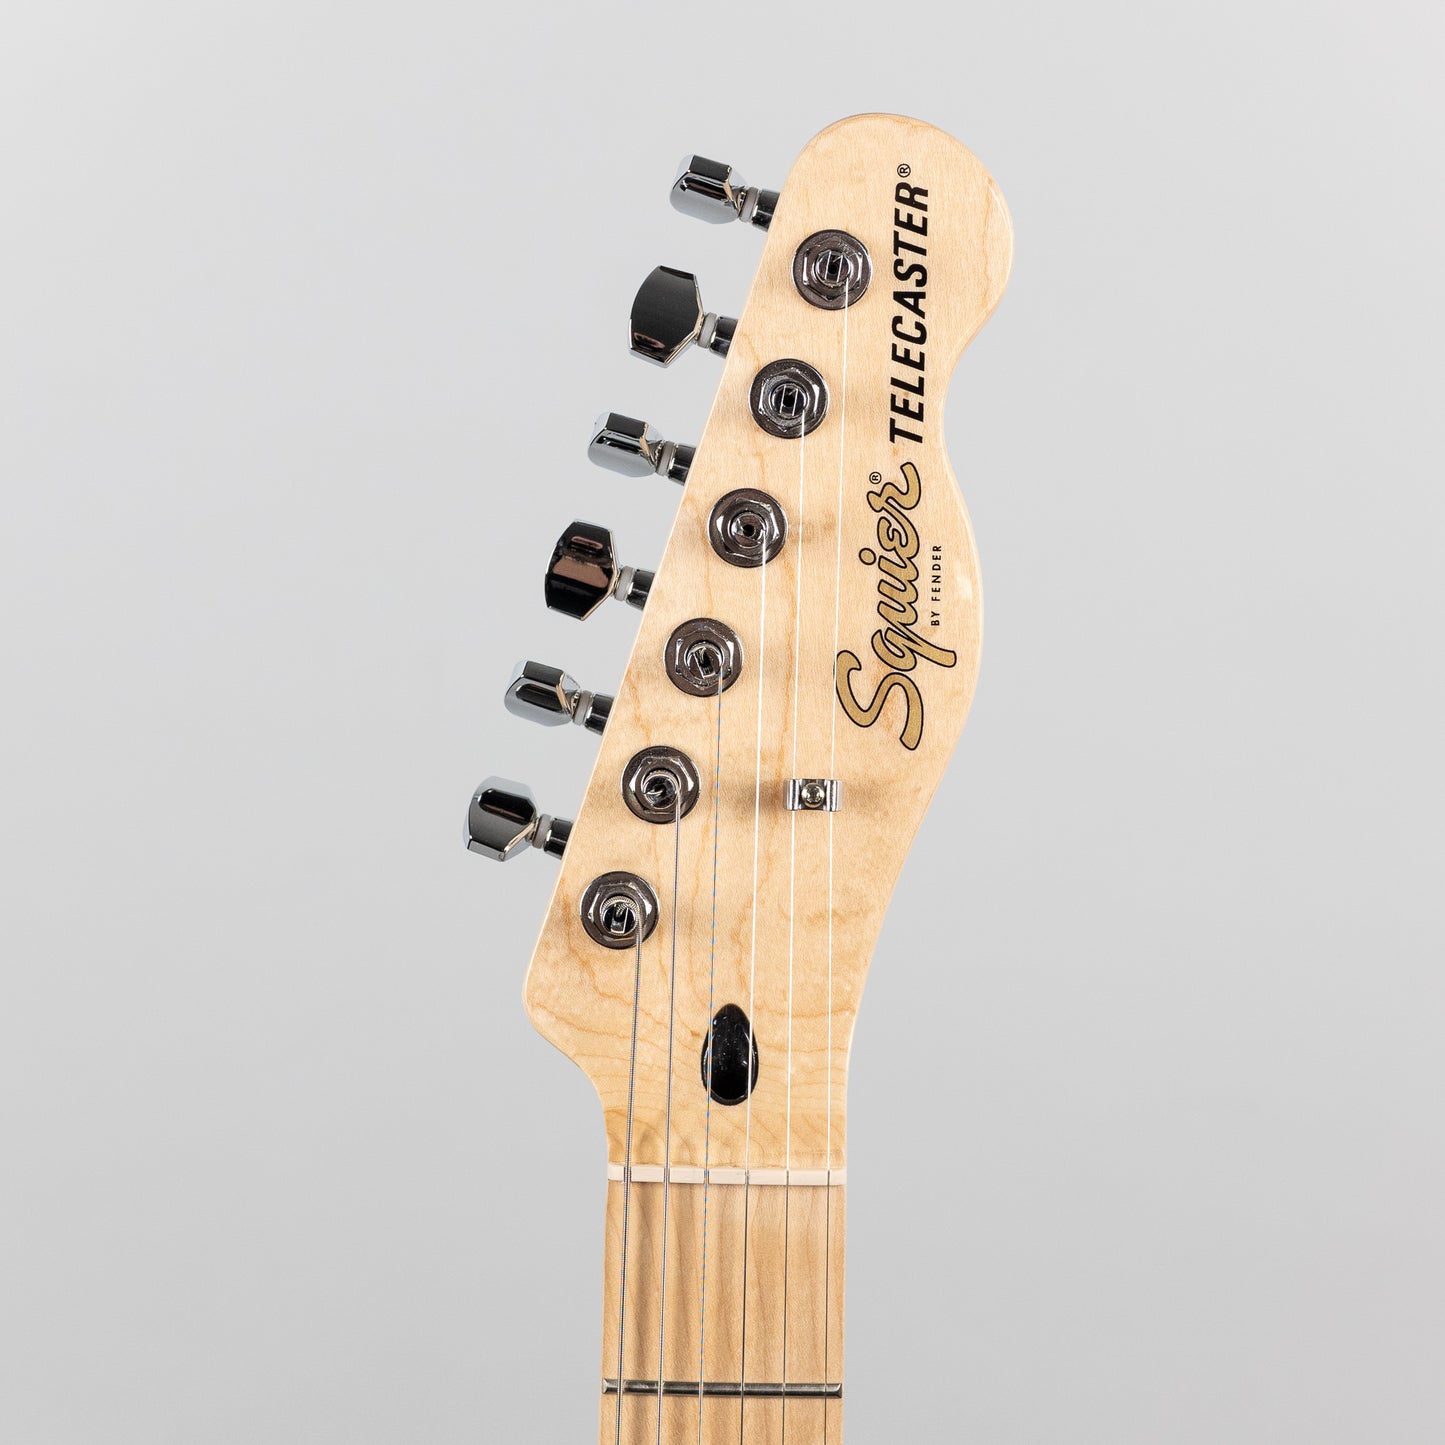 Squier Affinity Series Telecaster in Butterscotch Blonde